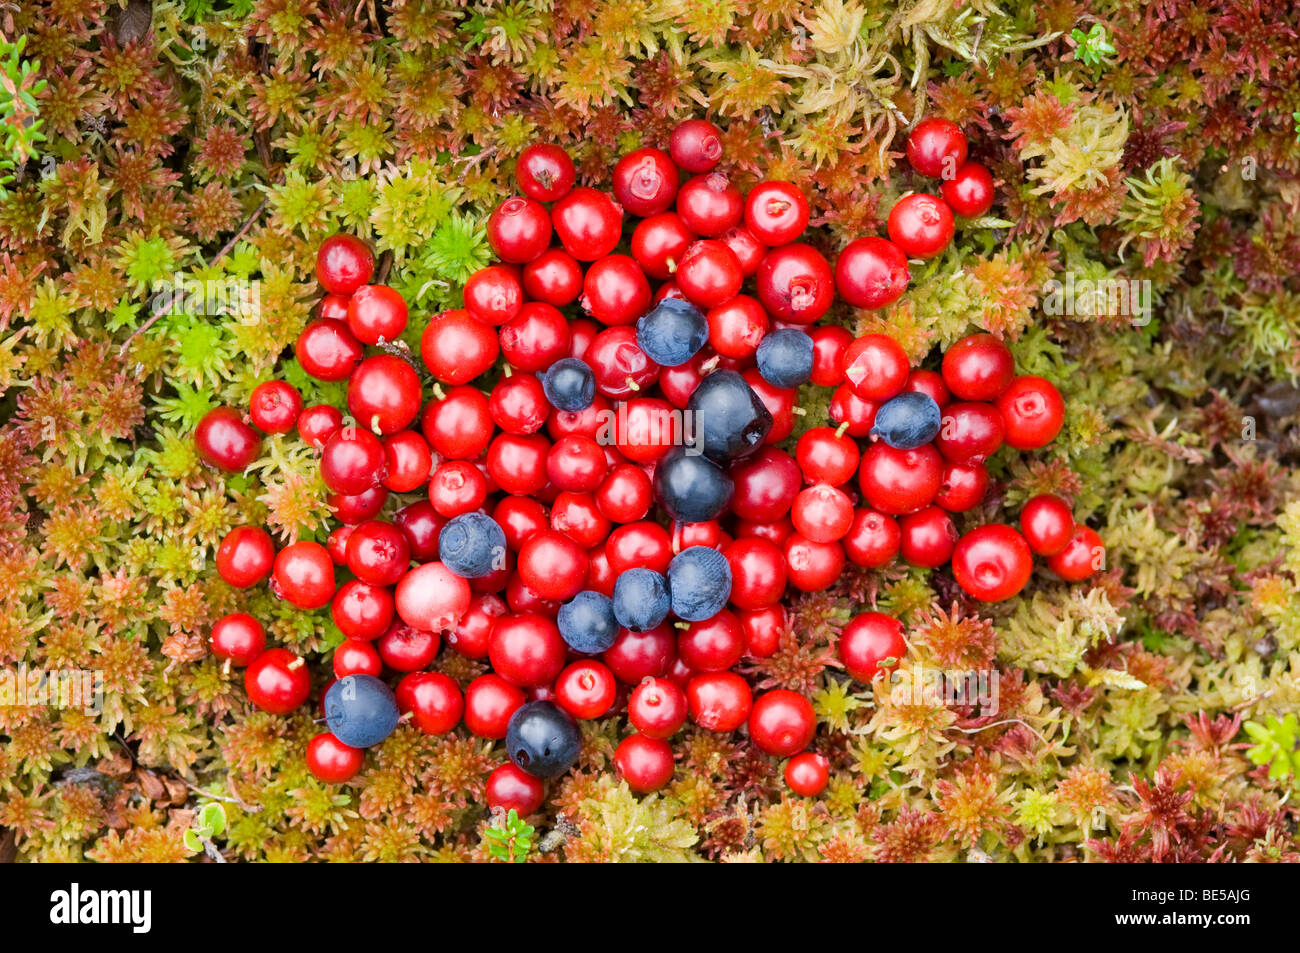 Wild food. Red berries/ fruits of Cowberry, or Lingonberry, Vaccinium vitis-idaea, and black berries of Bilberry, V. myrtillus Stock Photo